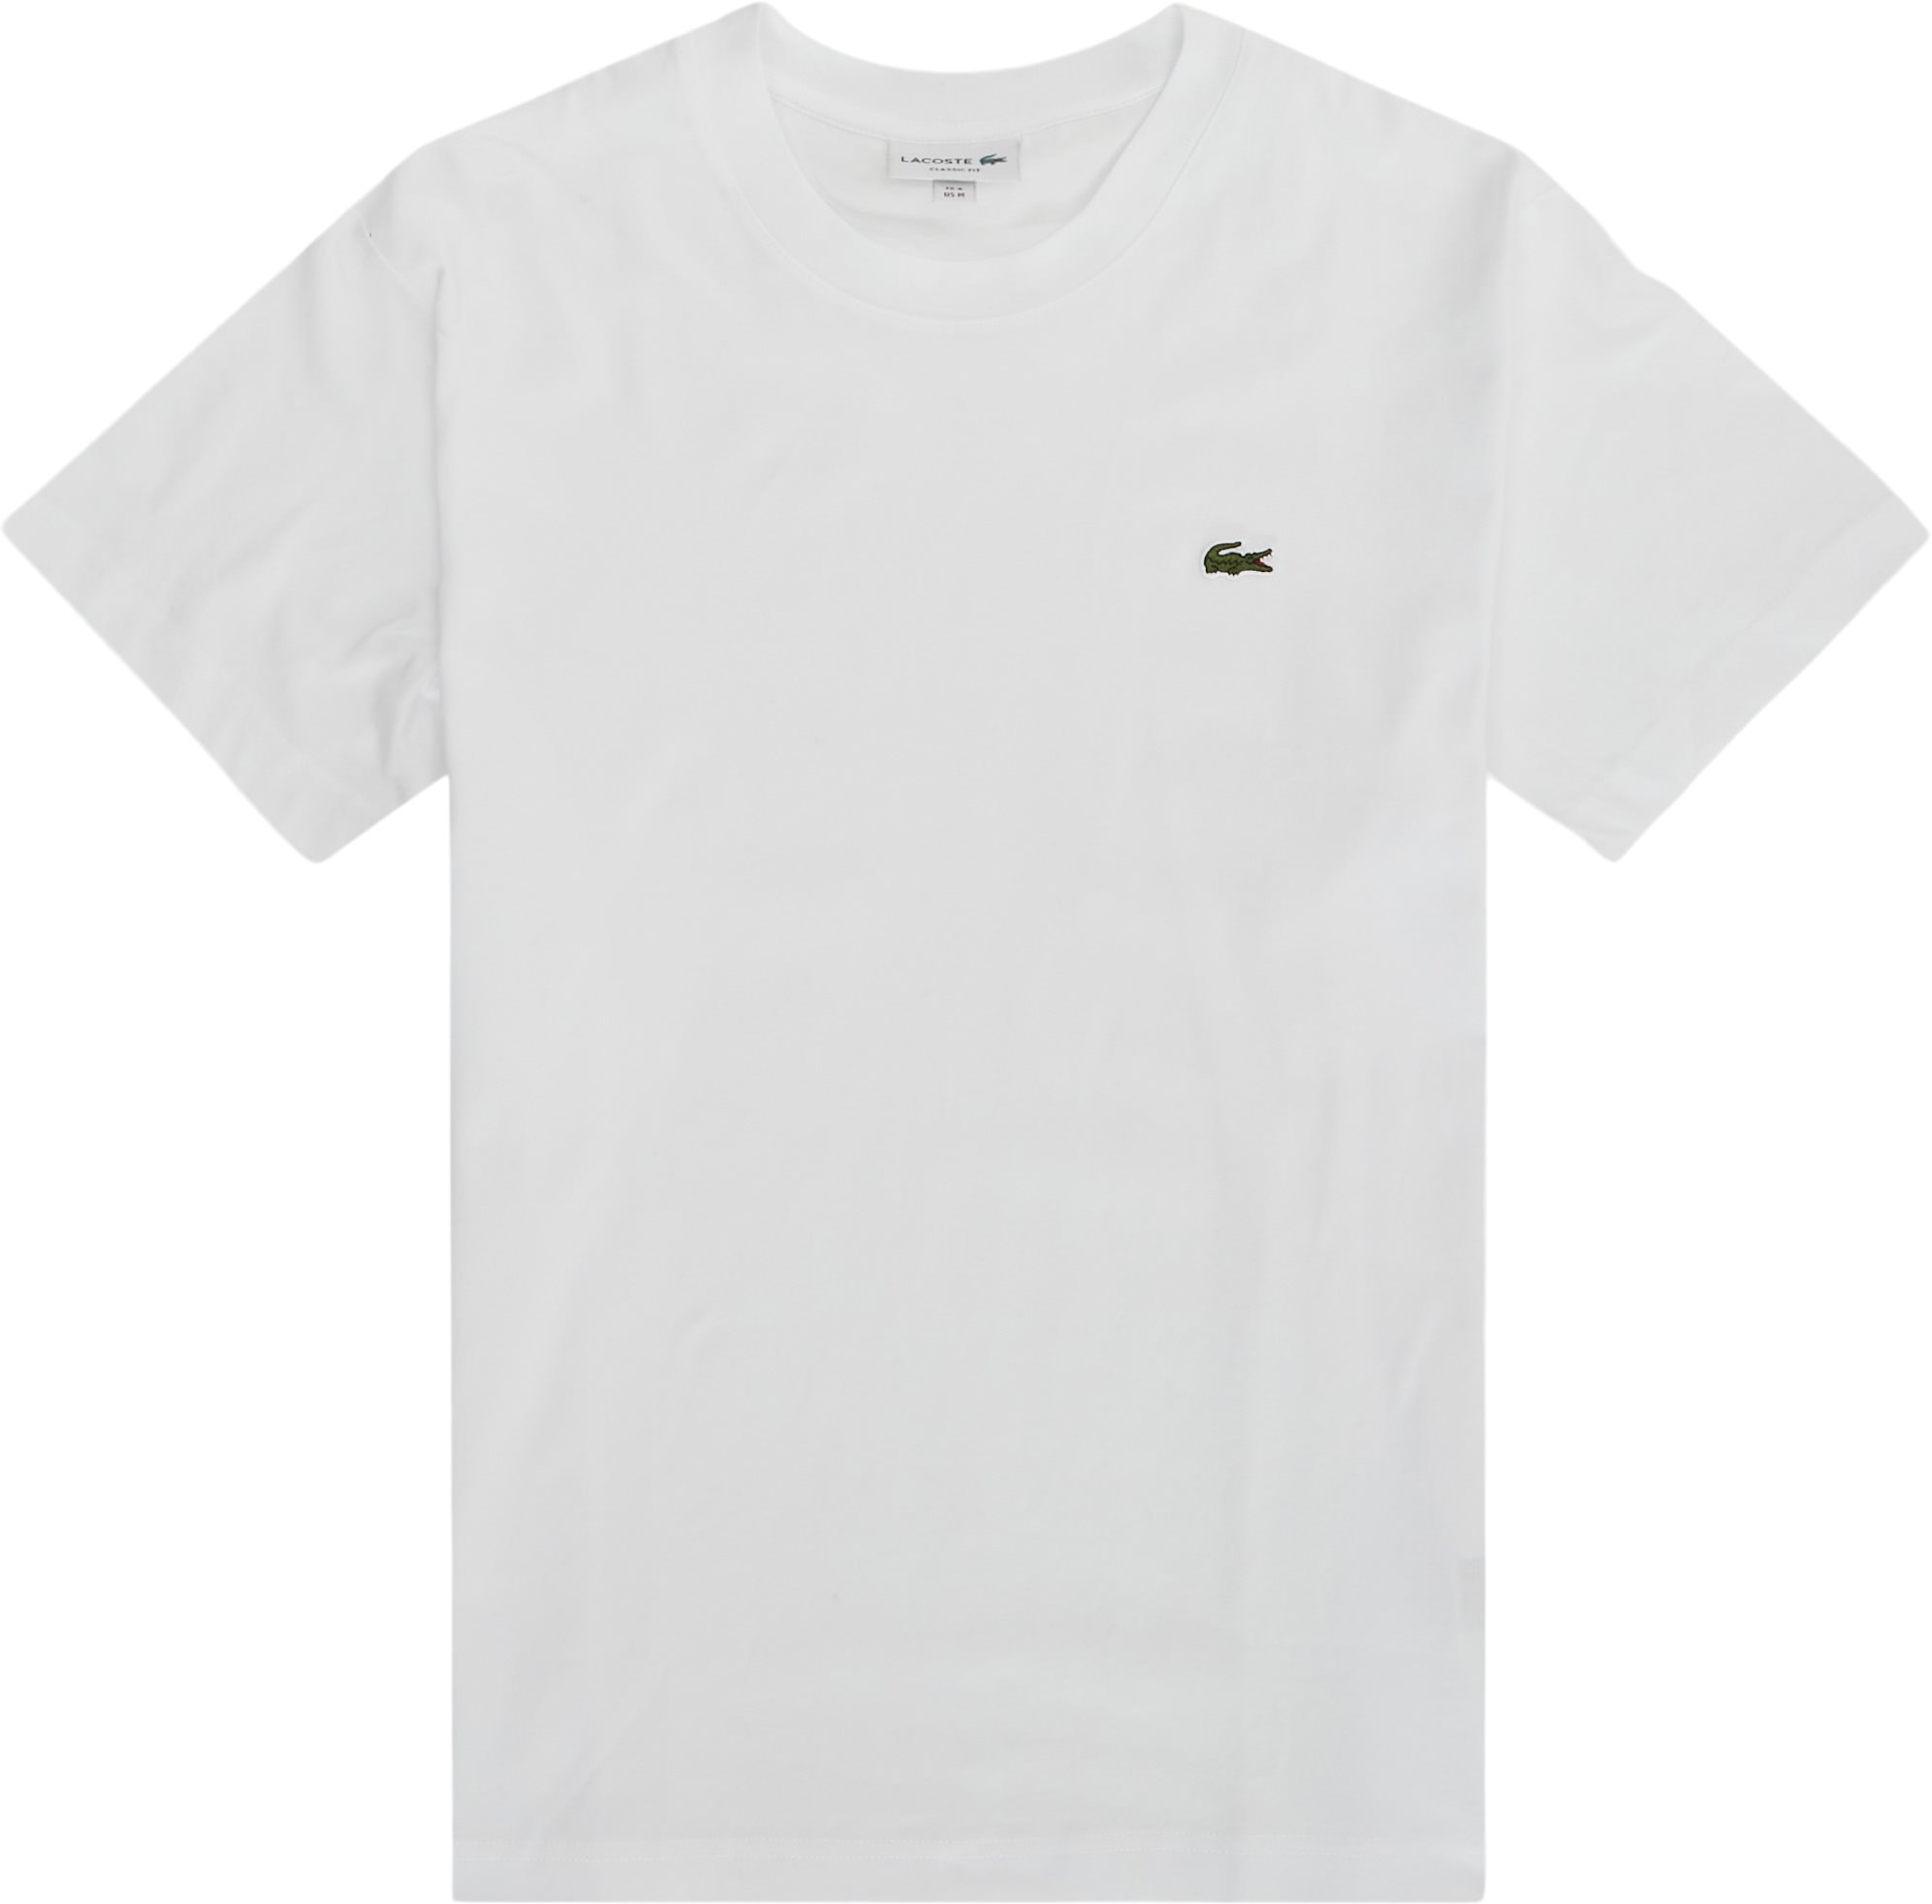 Lacoste T-shirts TH7318 2401 Hvid